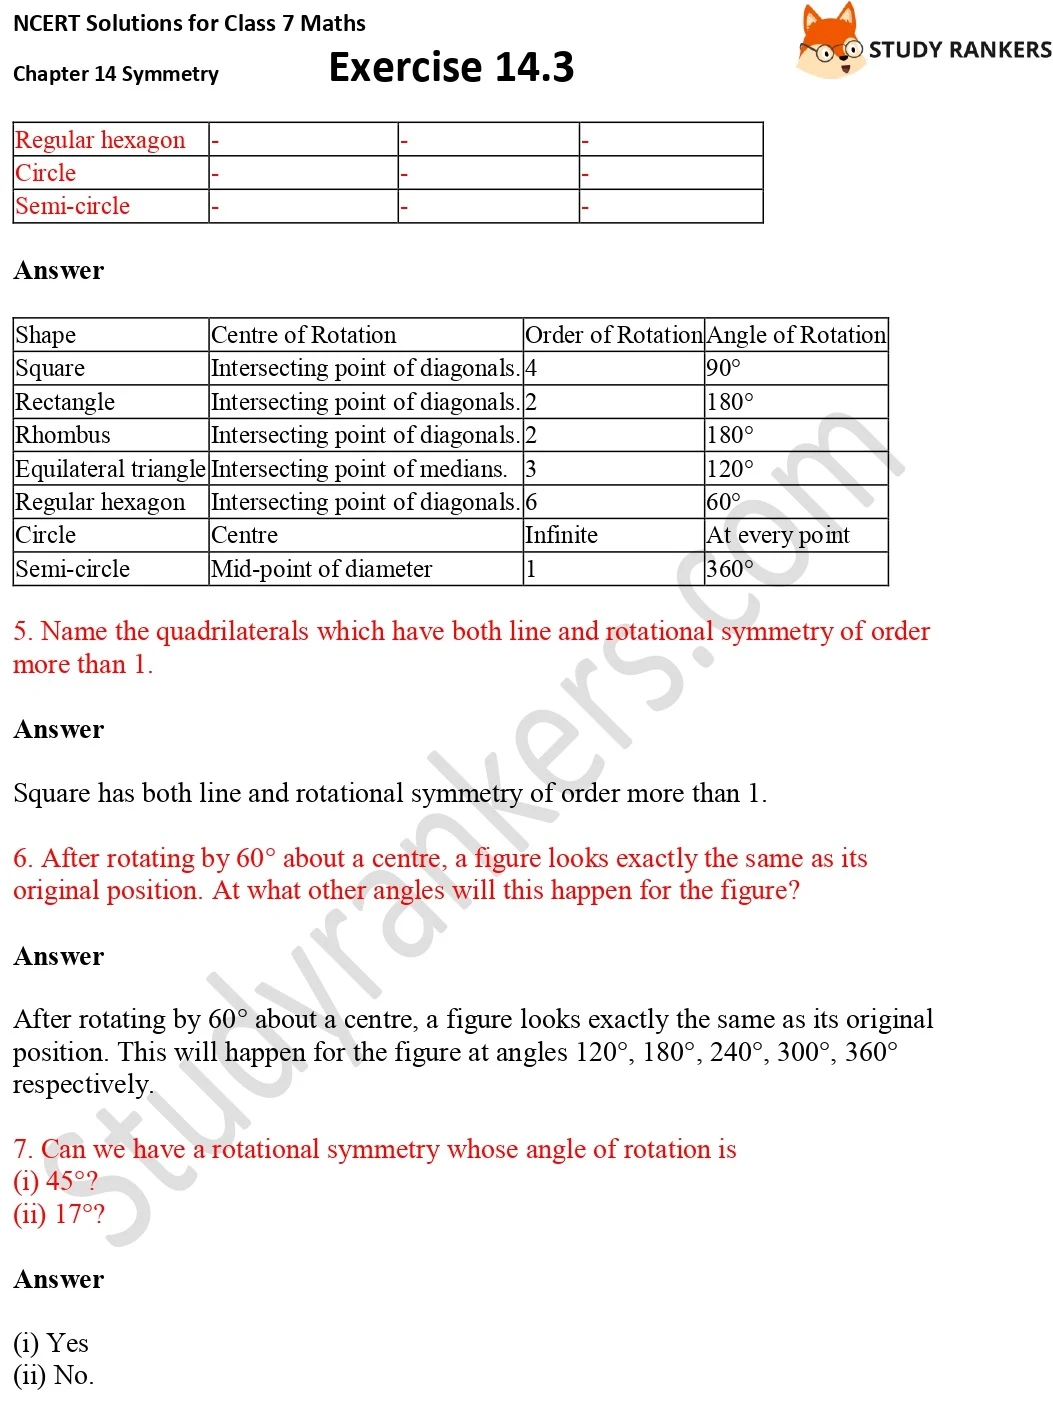 NCERT Solutions for Class 7 Maths Chapter 14 Symmetry Exercise 14.3 Part 2